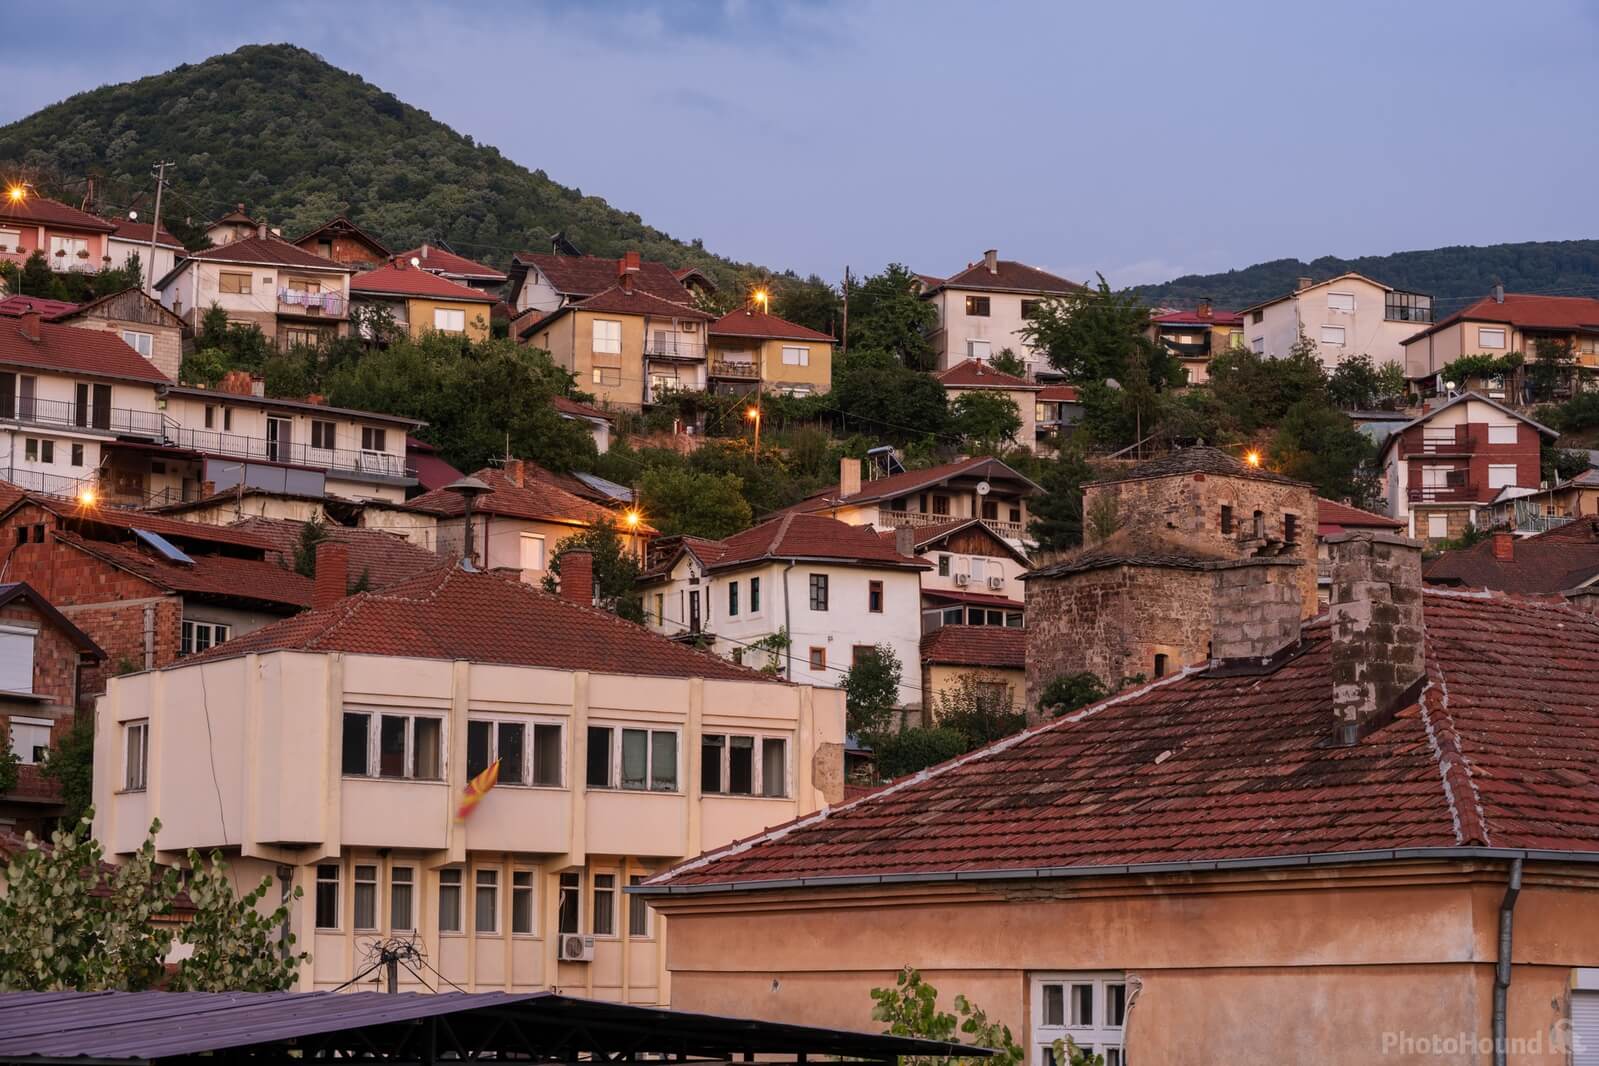 Image of Kratovo Old Town by Luka Esenko